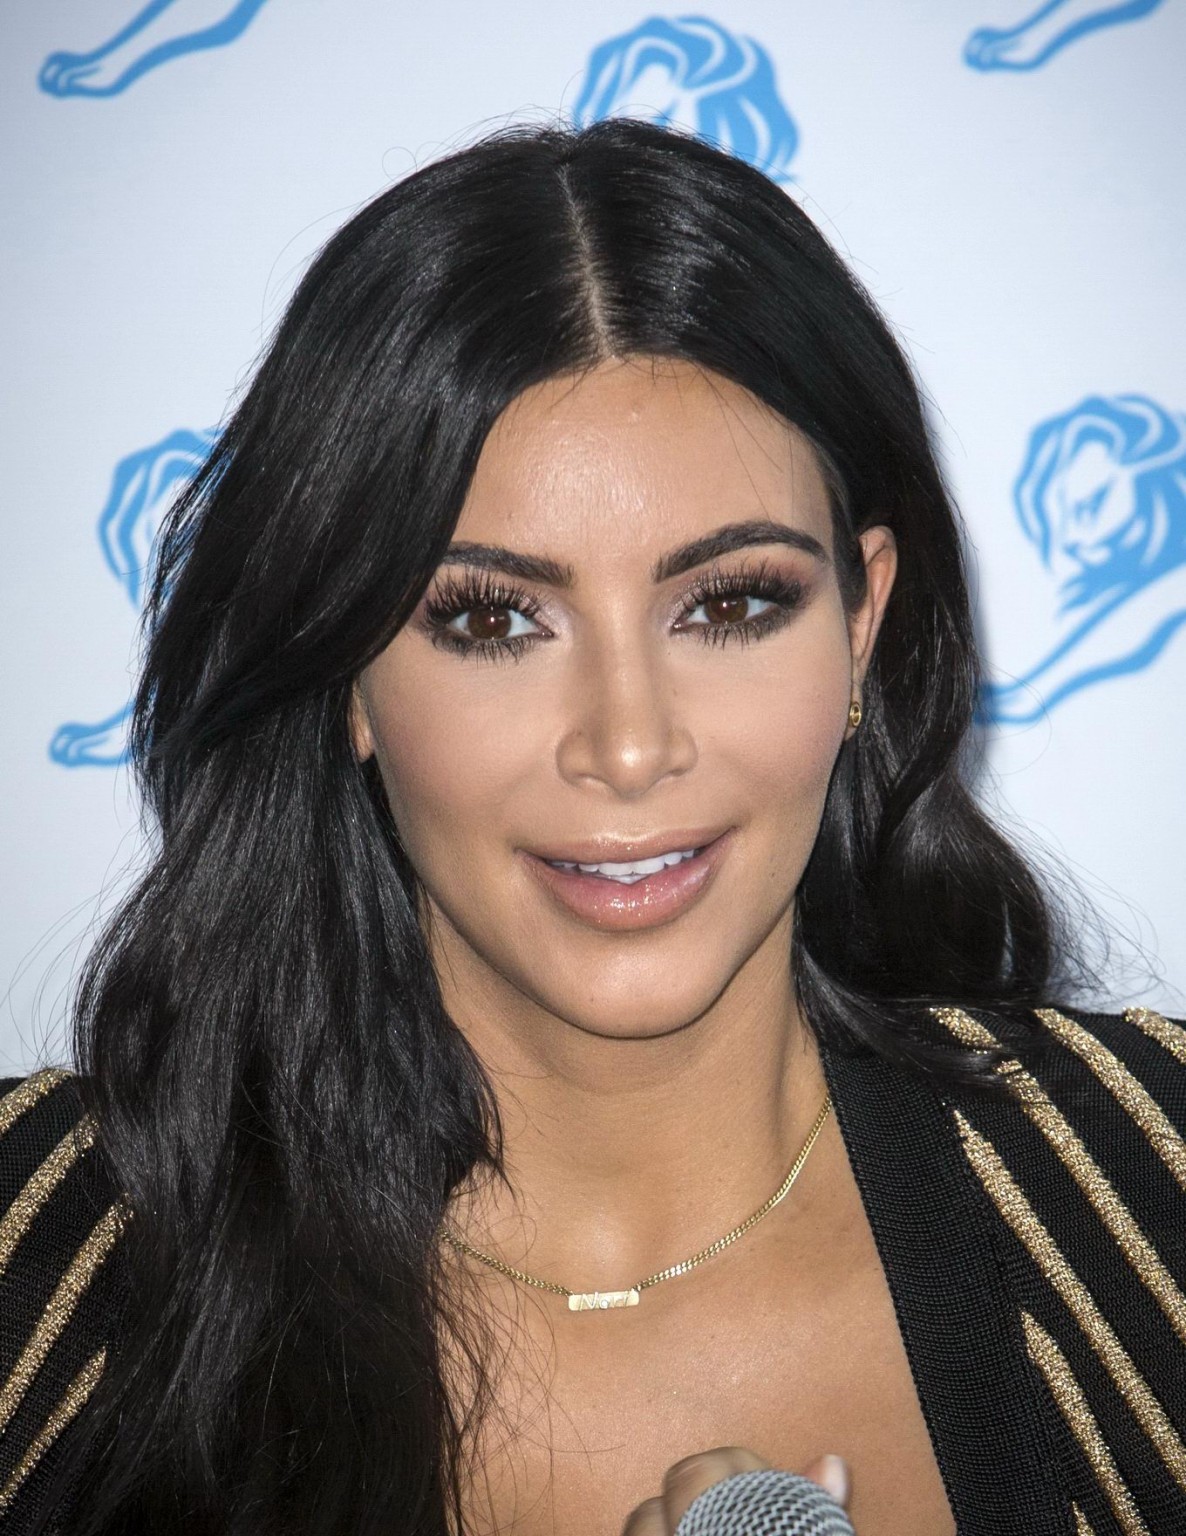 Kim Kardashian showing huge cleavage at the Cannes Lions event #75160357